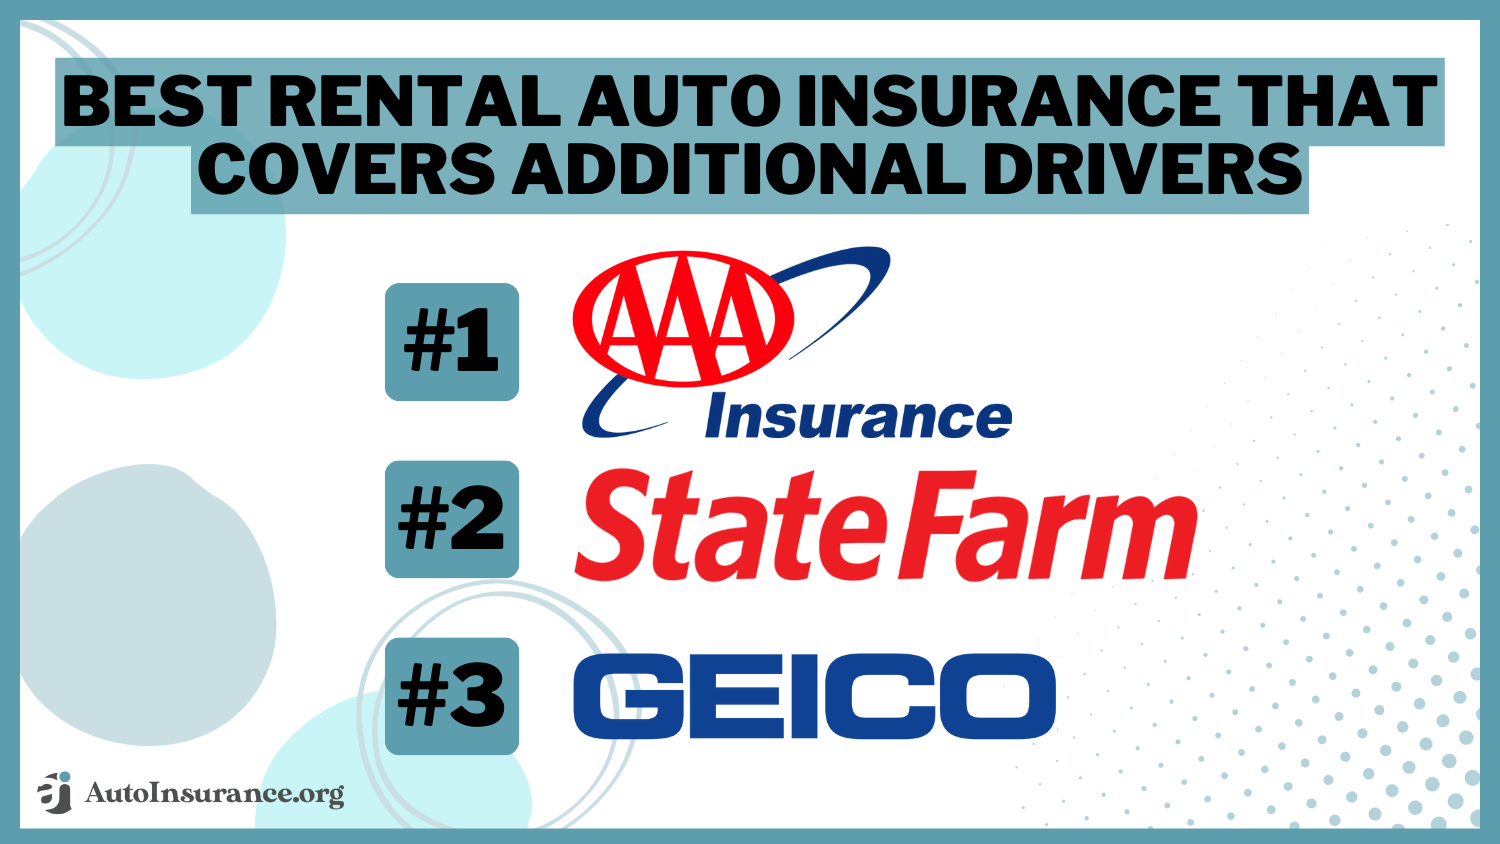 Best Rental Auto Insurance That Covers Additional Drivers: AAA, State Farm, Geico